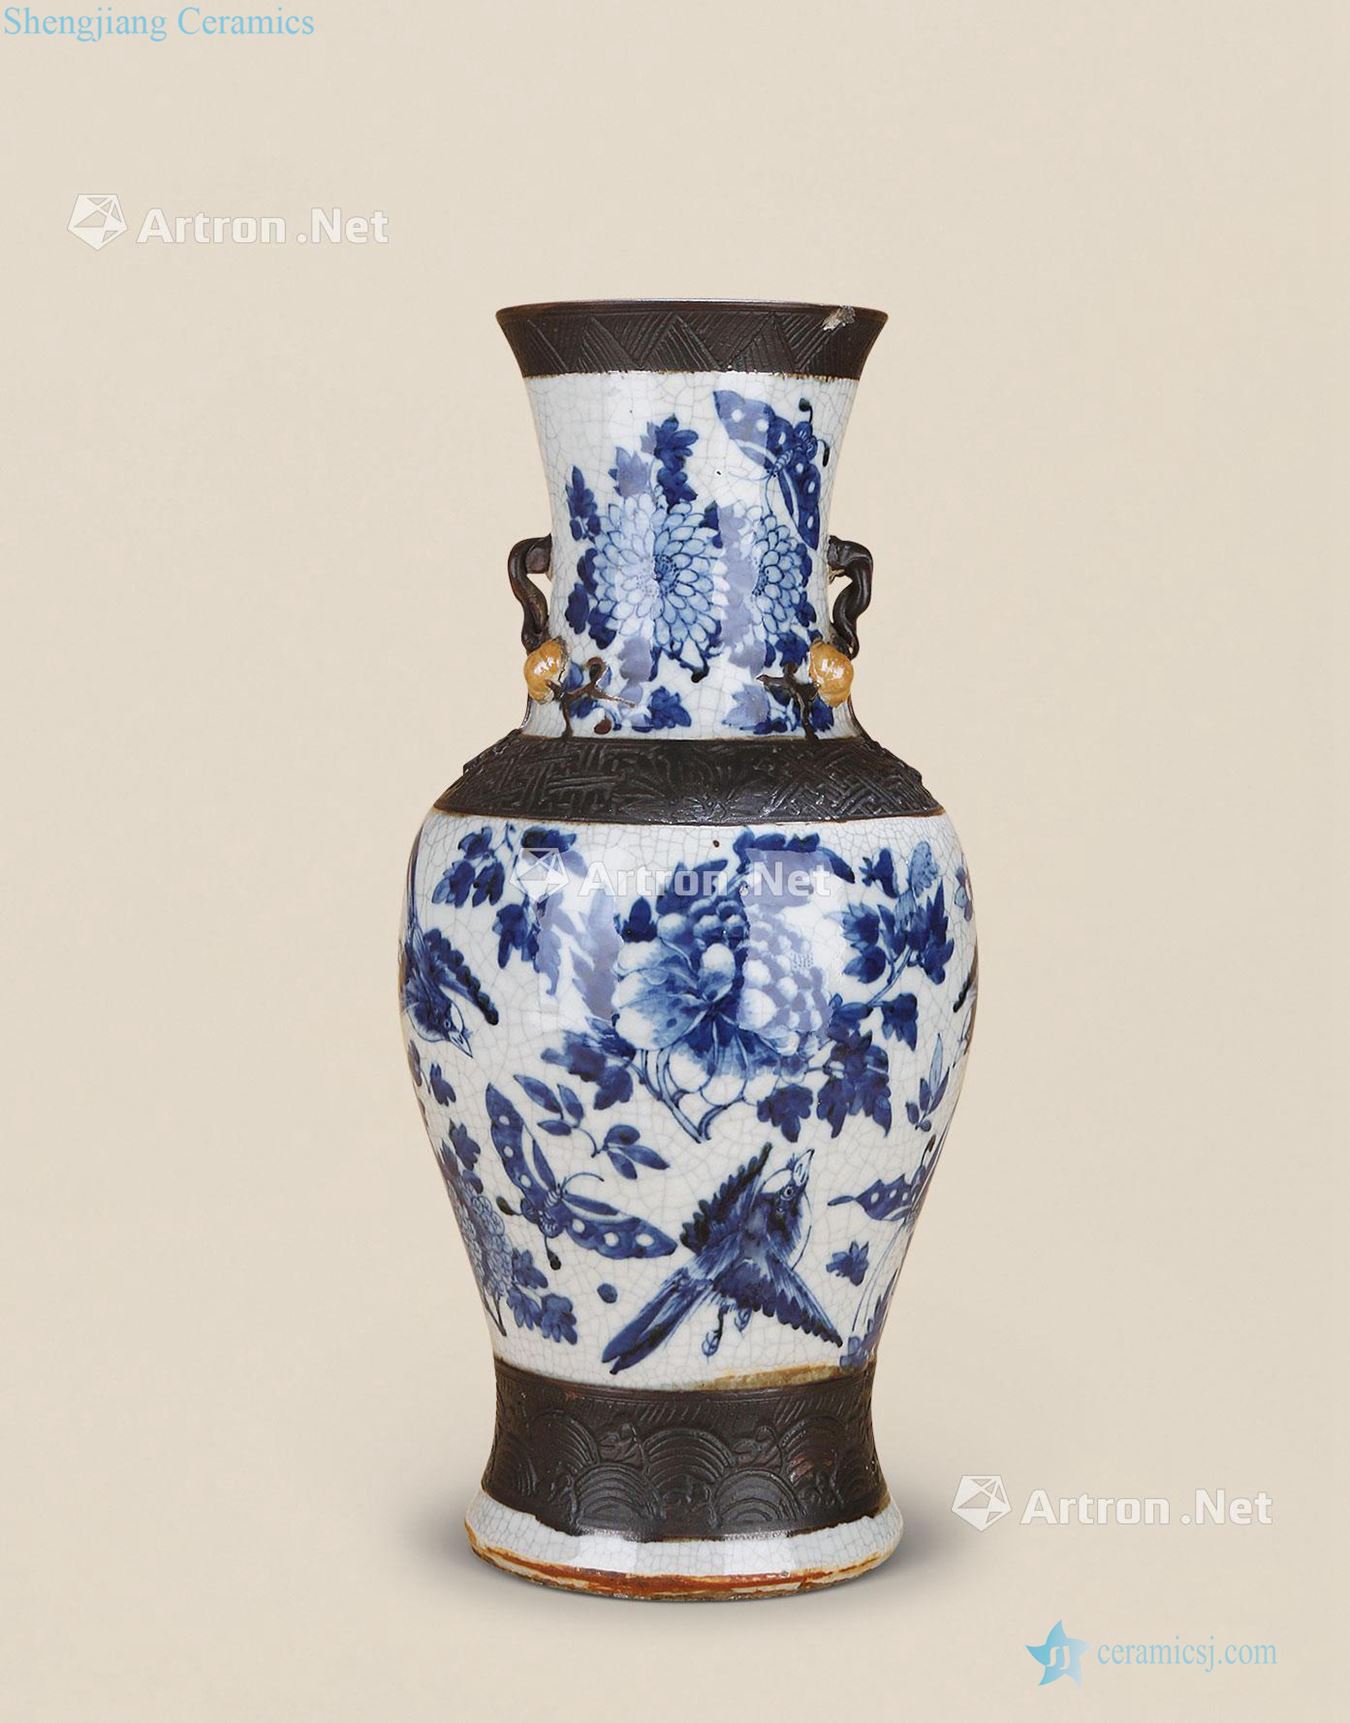 The elder brother of the qing long with the blue and white flower on grain